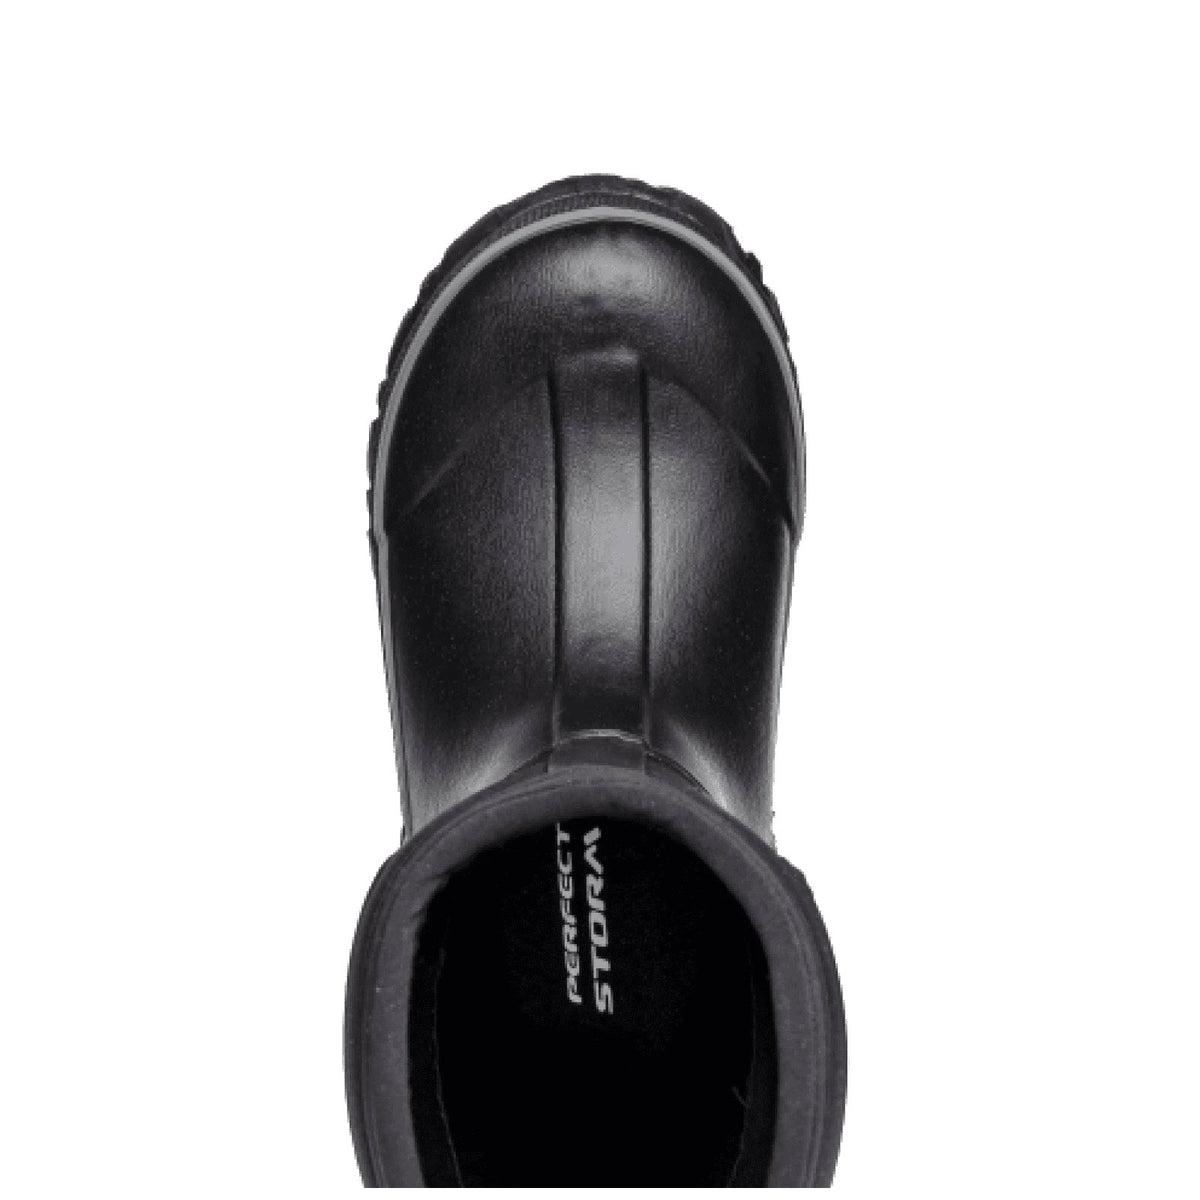 Perfect Storm black sandal featuring a non-slip outsole, viewed from above on a white background.